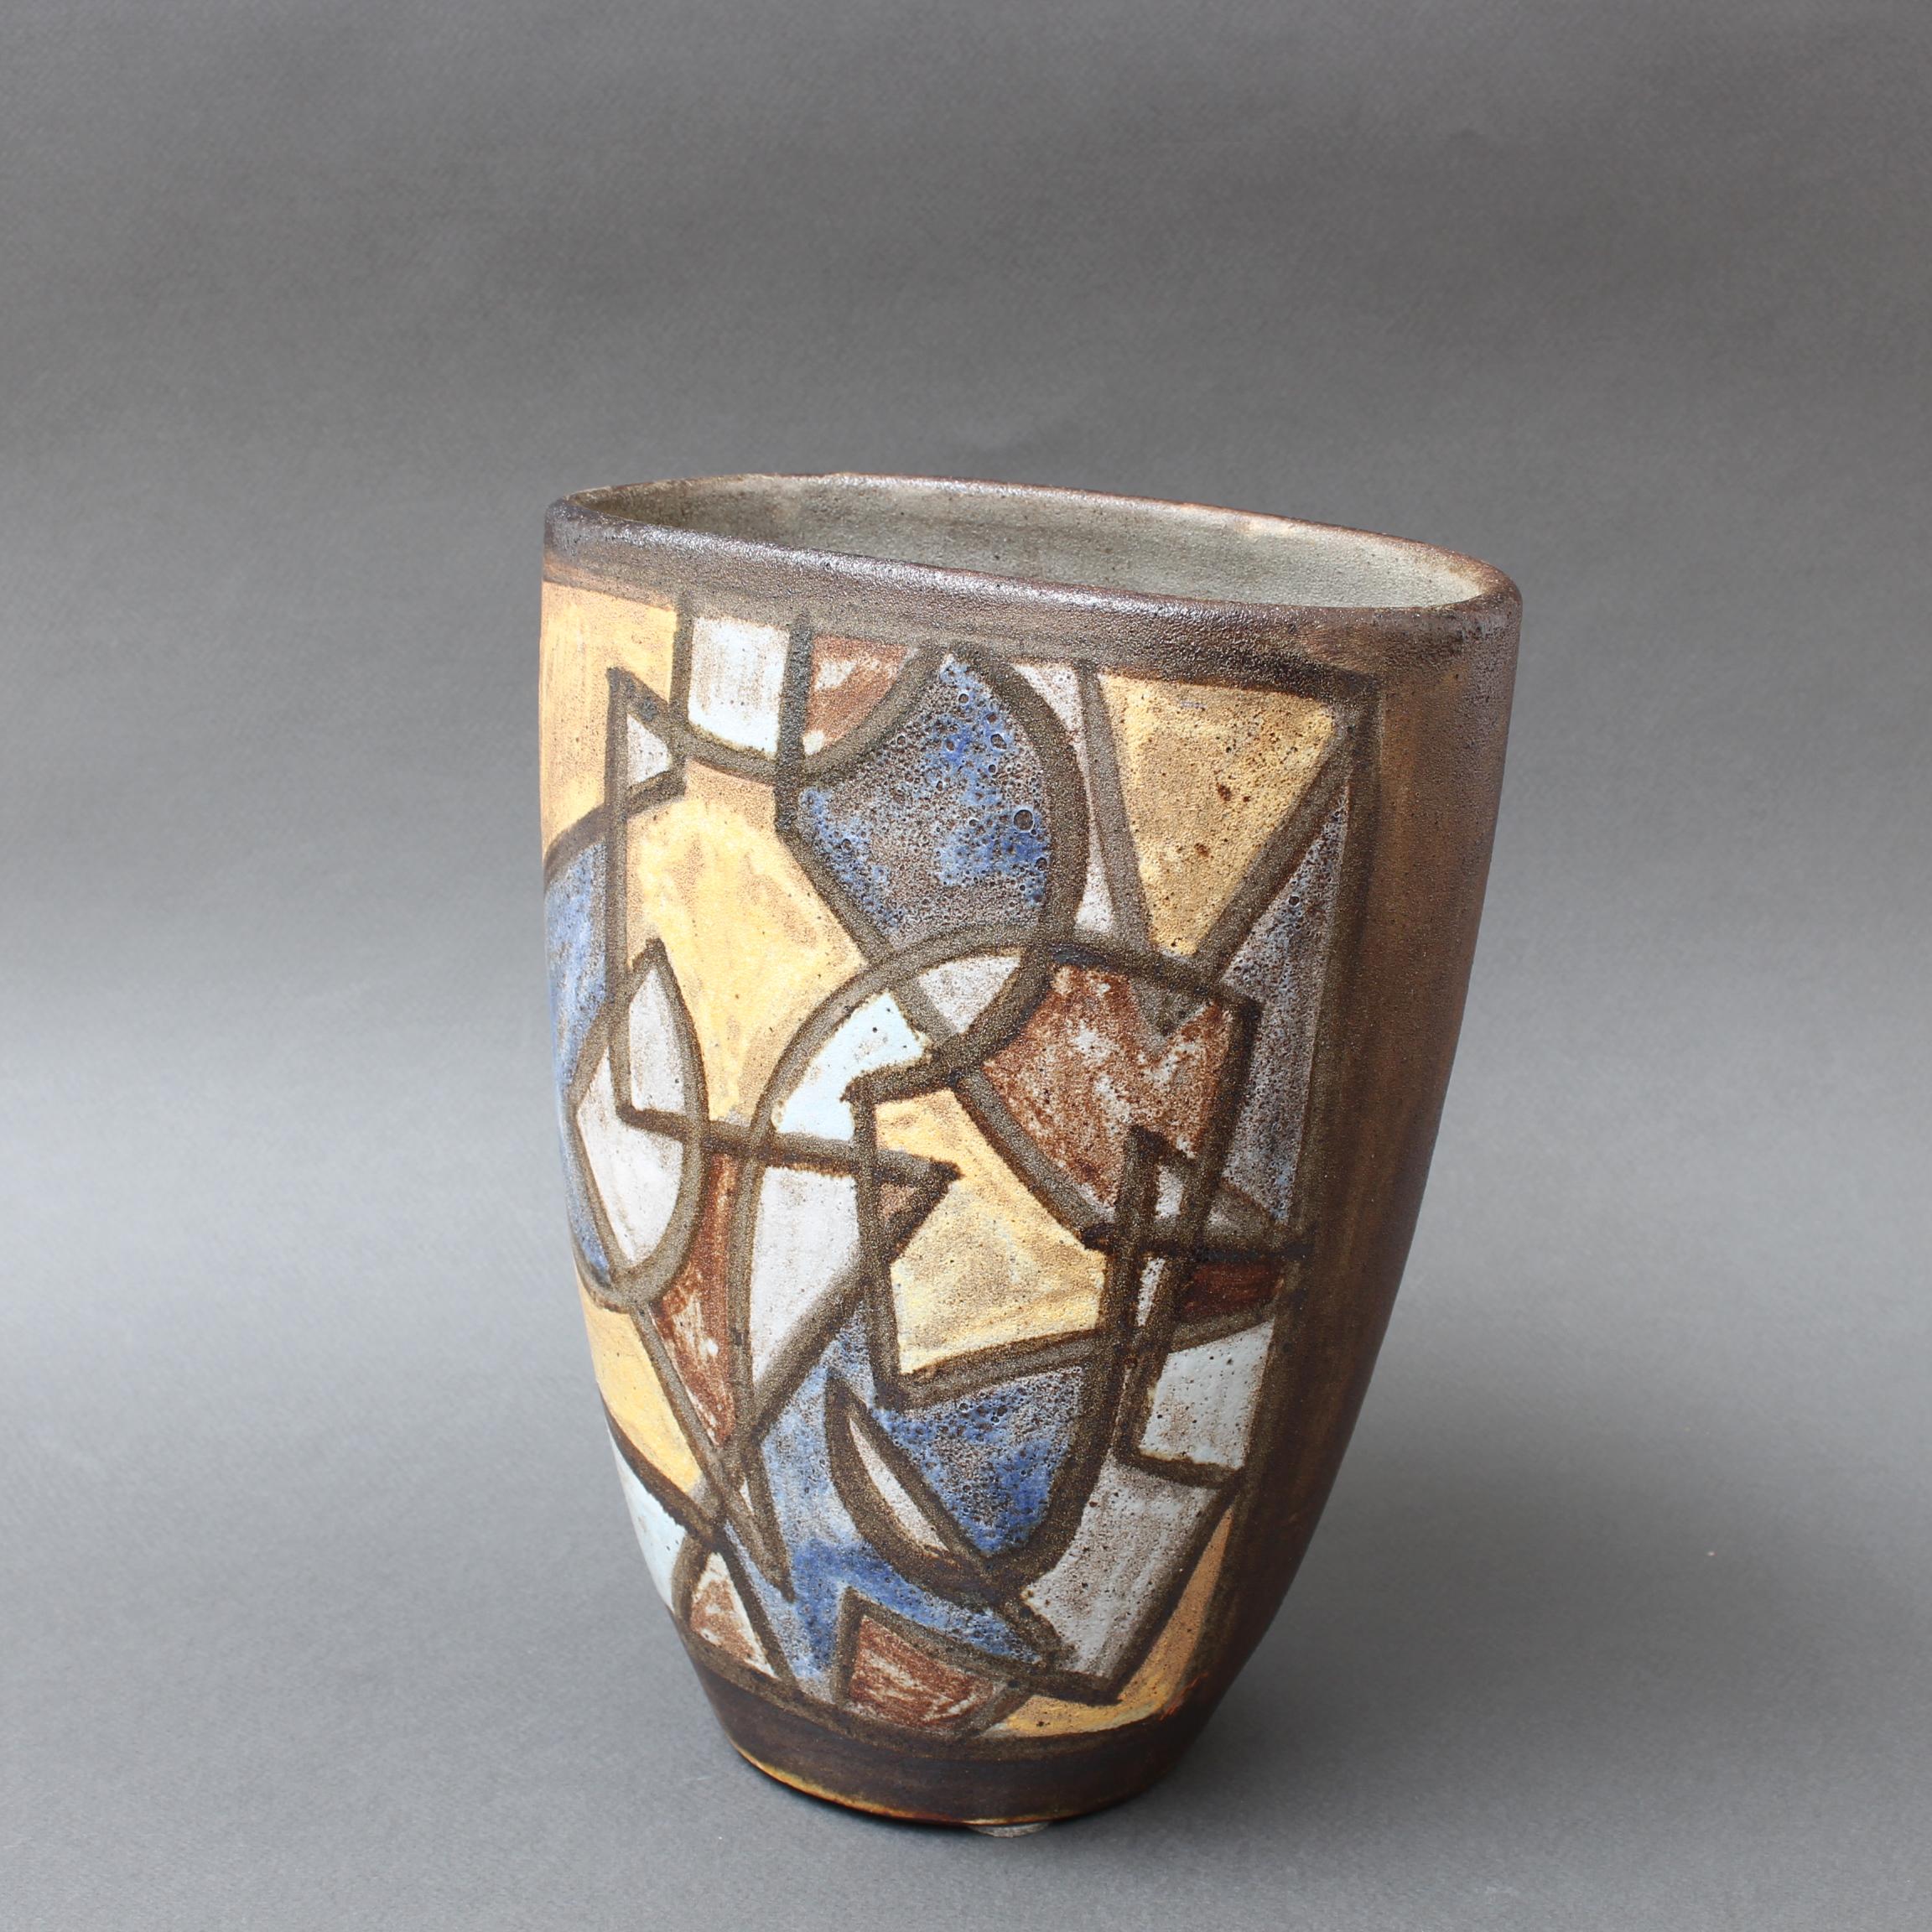 Ceramic decorative vase by Alexandre Kostanda, Vallauris, France (circa 1960s). In his trademark natural clay and rustic style, Kostanda created beautifully original vessels, such as vases, pitchers and pots which were both utilitarian and stunning